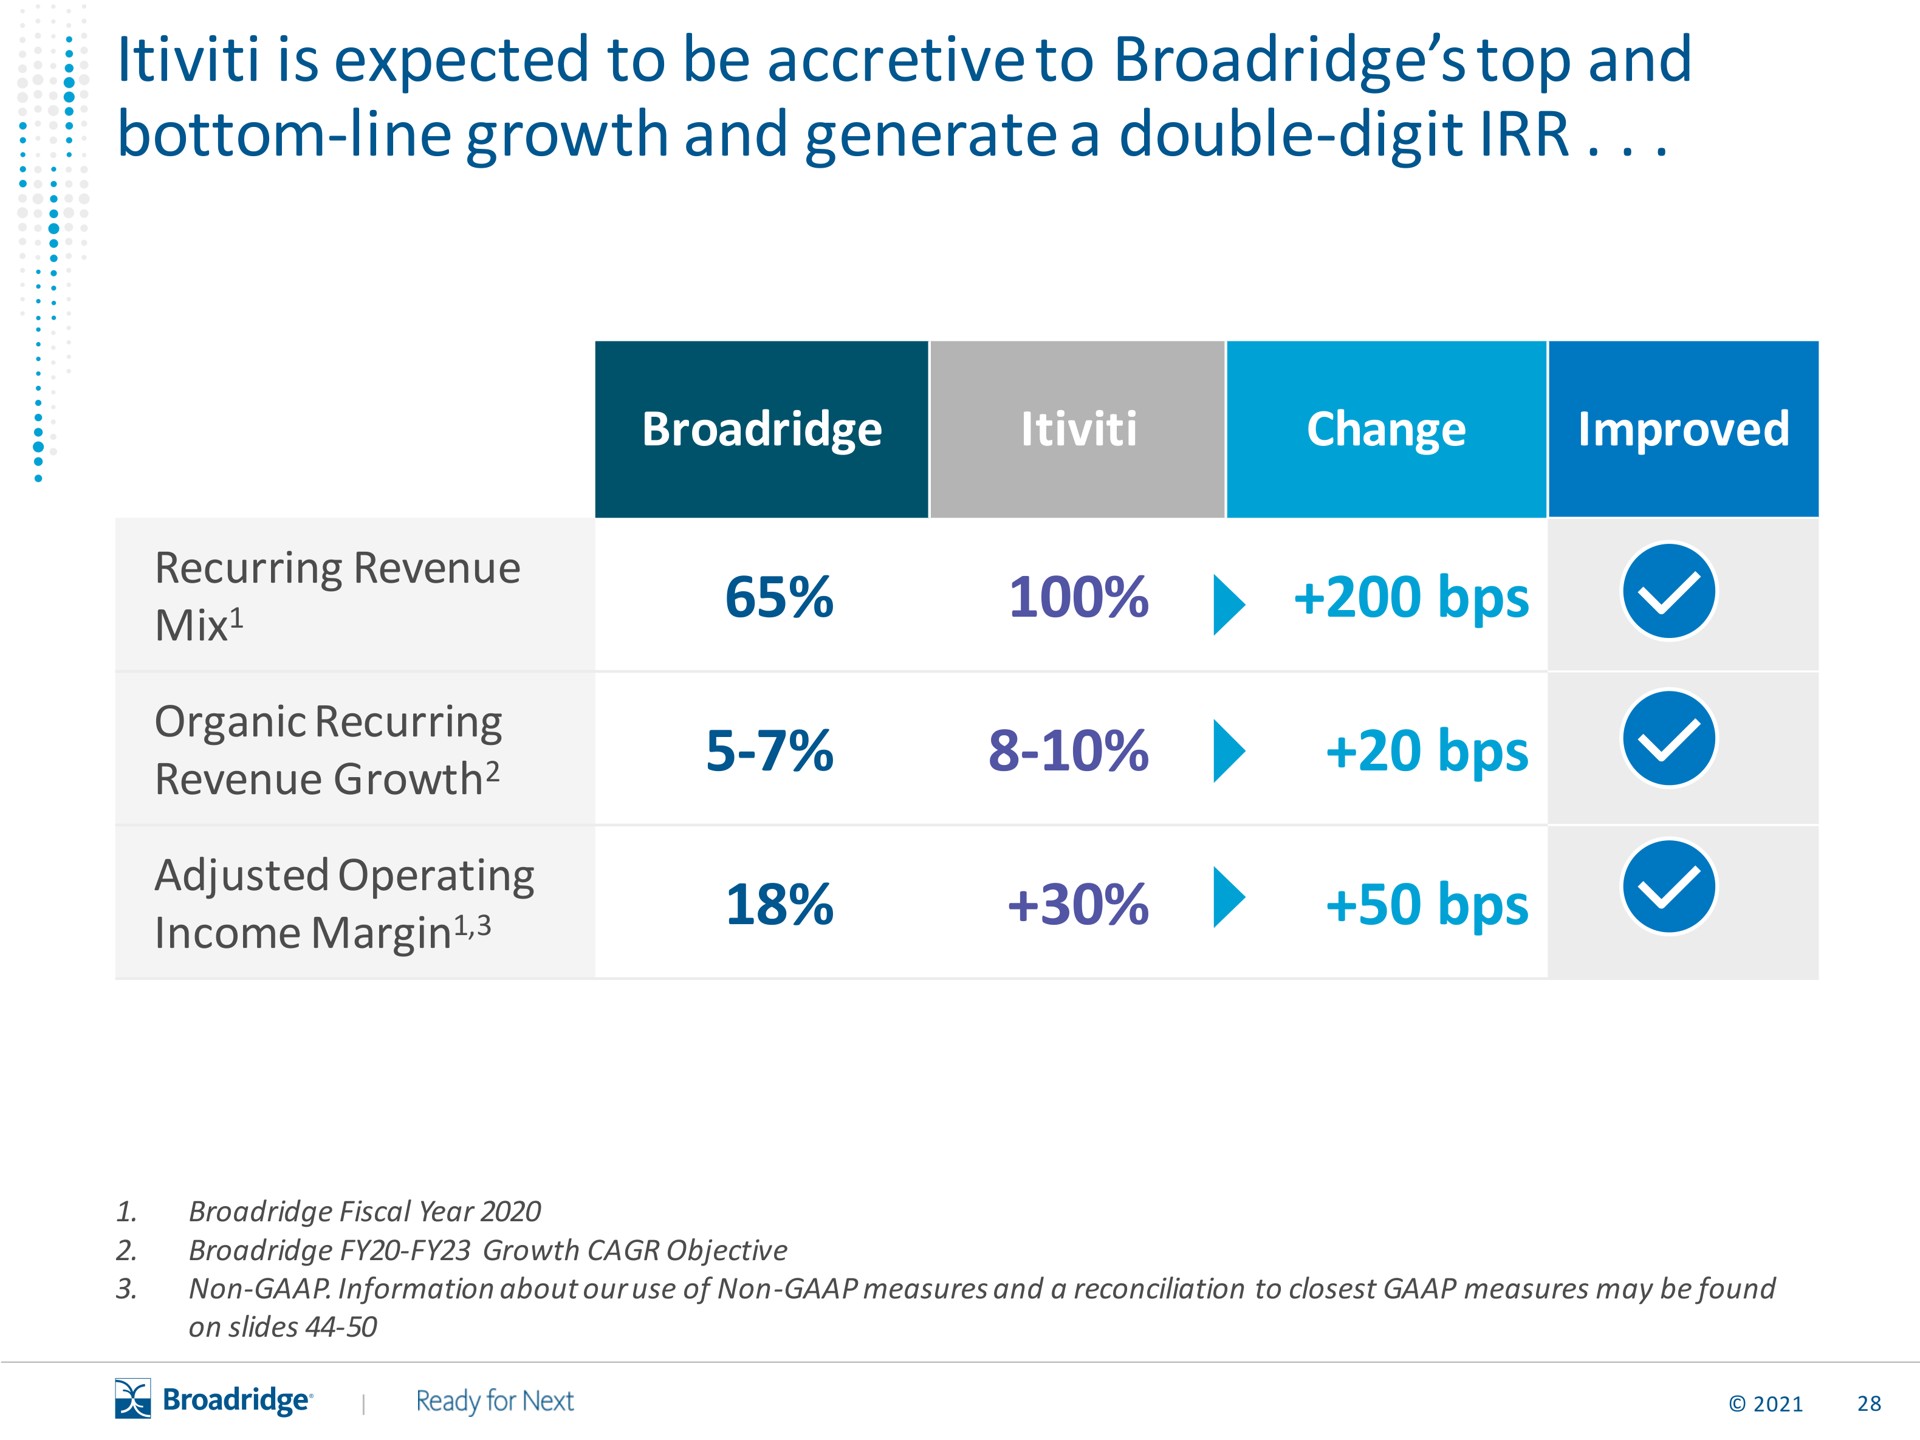 is expected to be accretive to top and bottom line growth and generate a double digit adjusted operating | Broadridge Financial Solutions